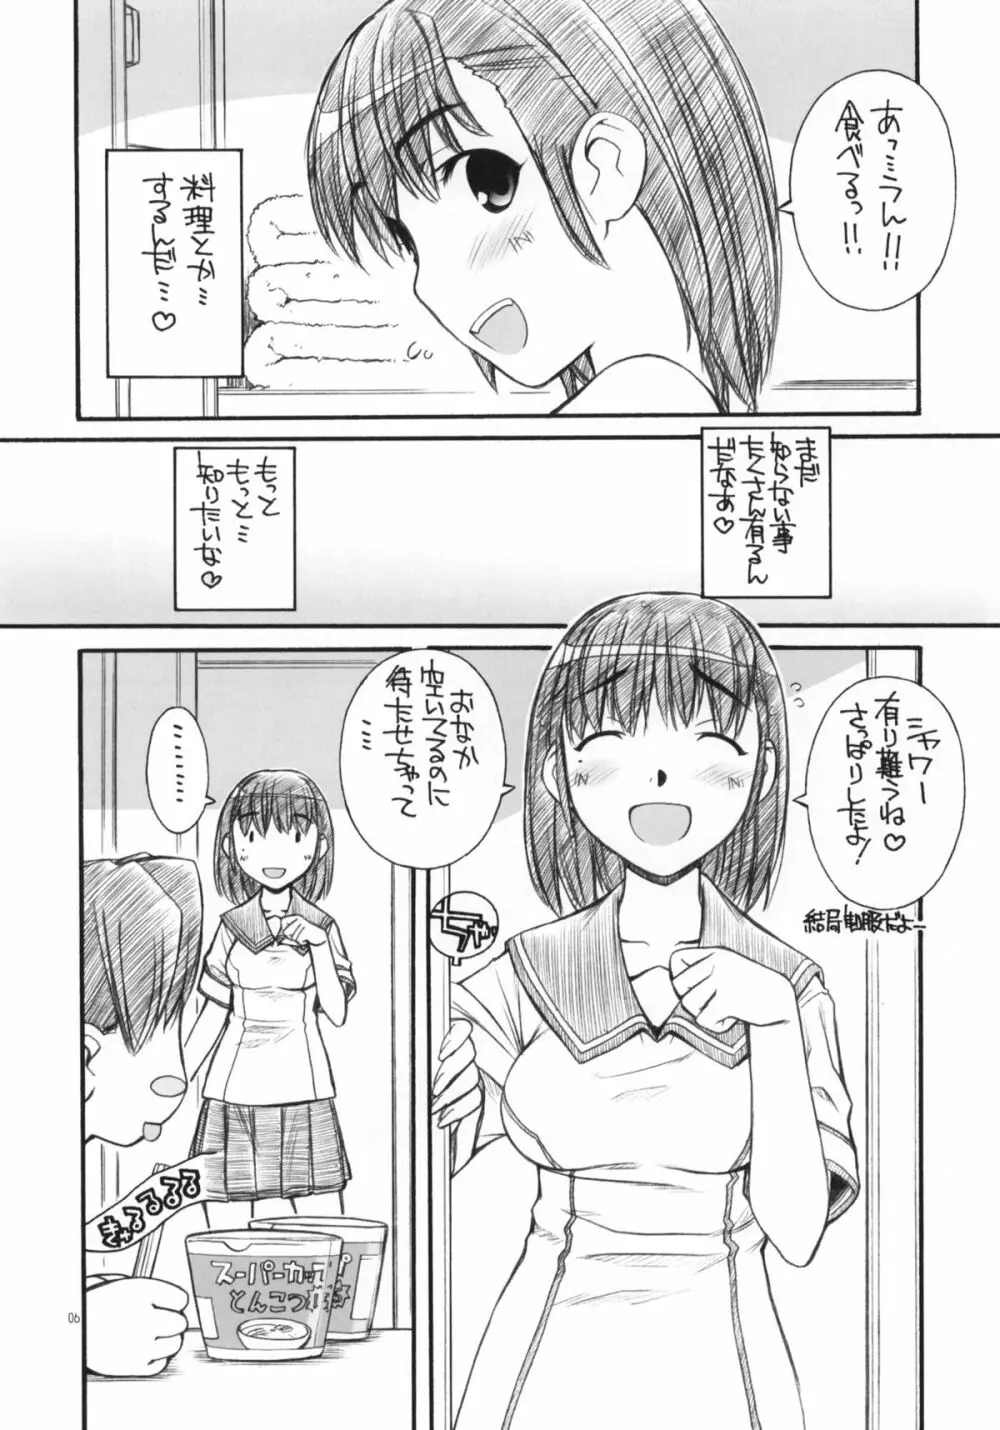 A Day in the Life 5ページ